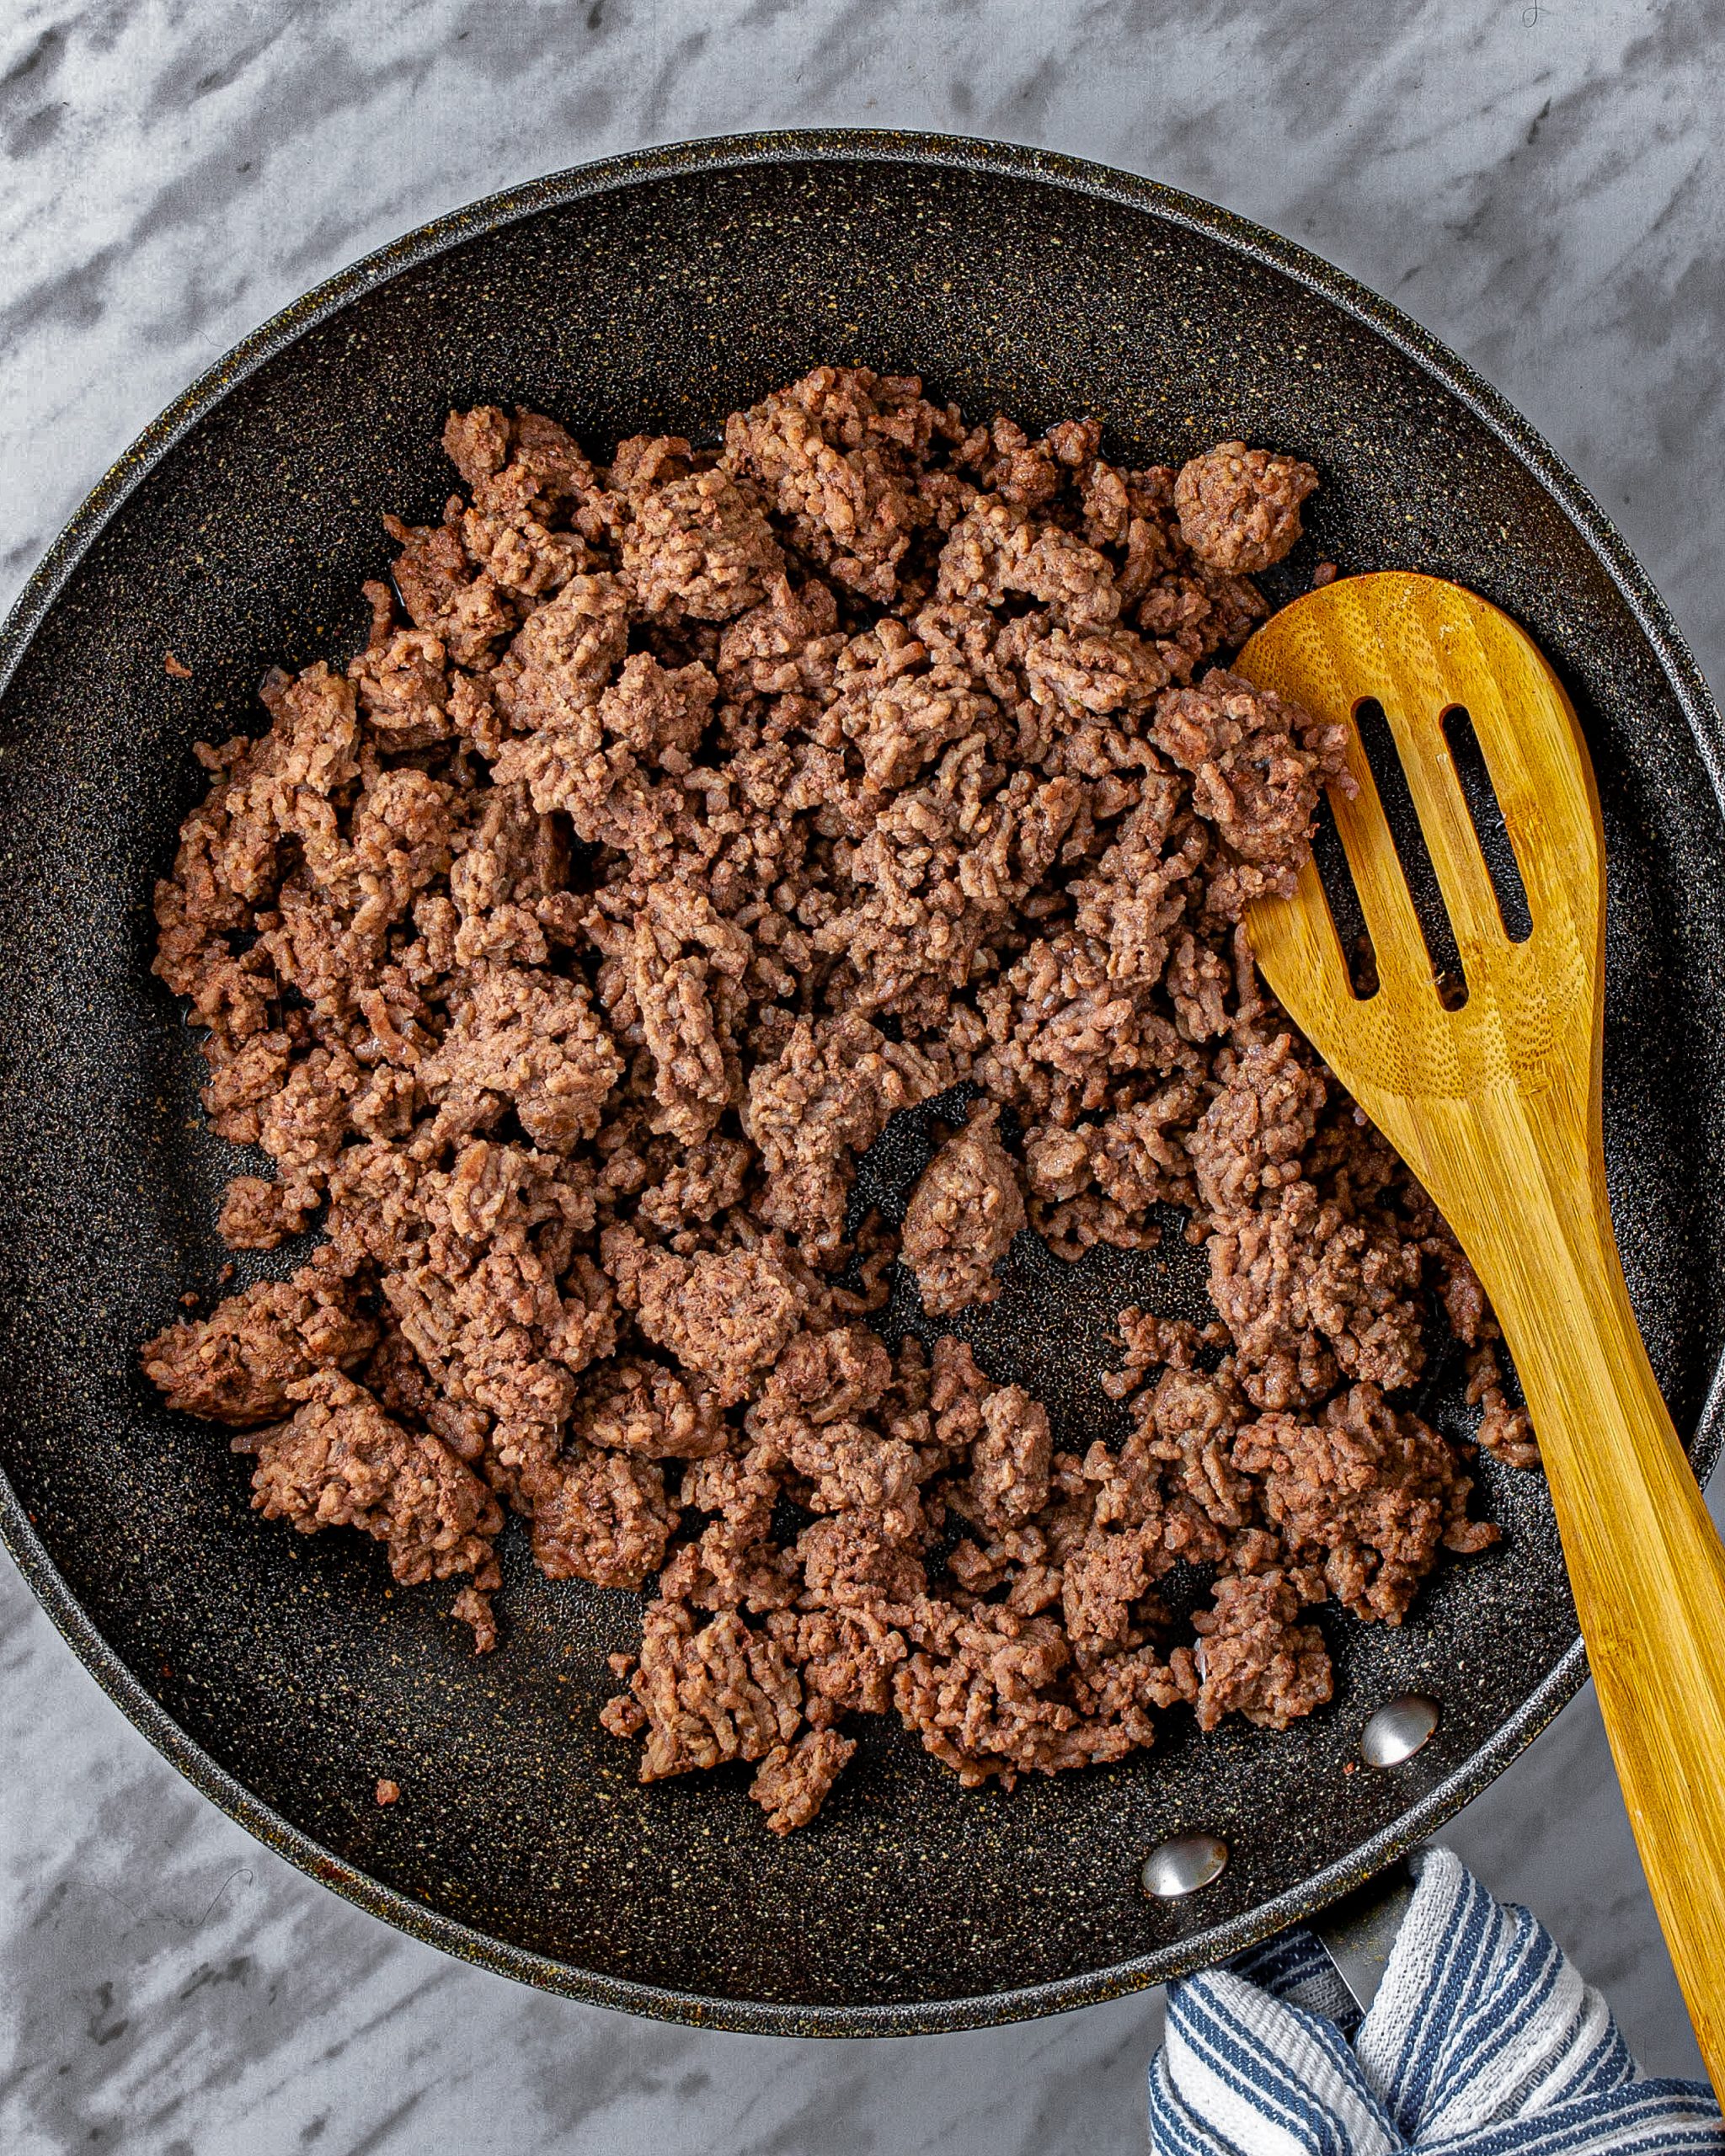 In a large skillet over medium heat, add the ground beef seasoned with salt and pepper and cook until brown.